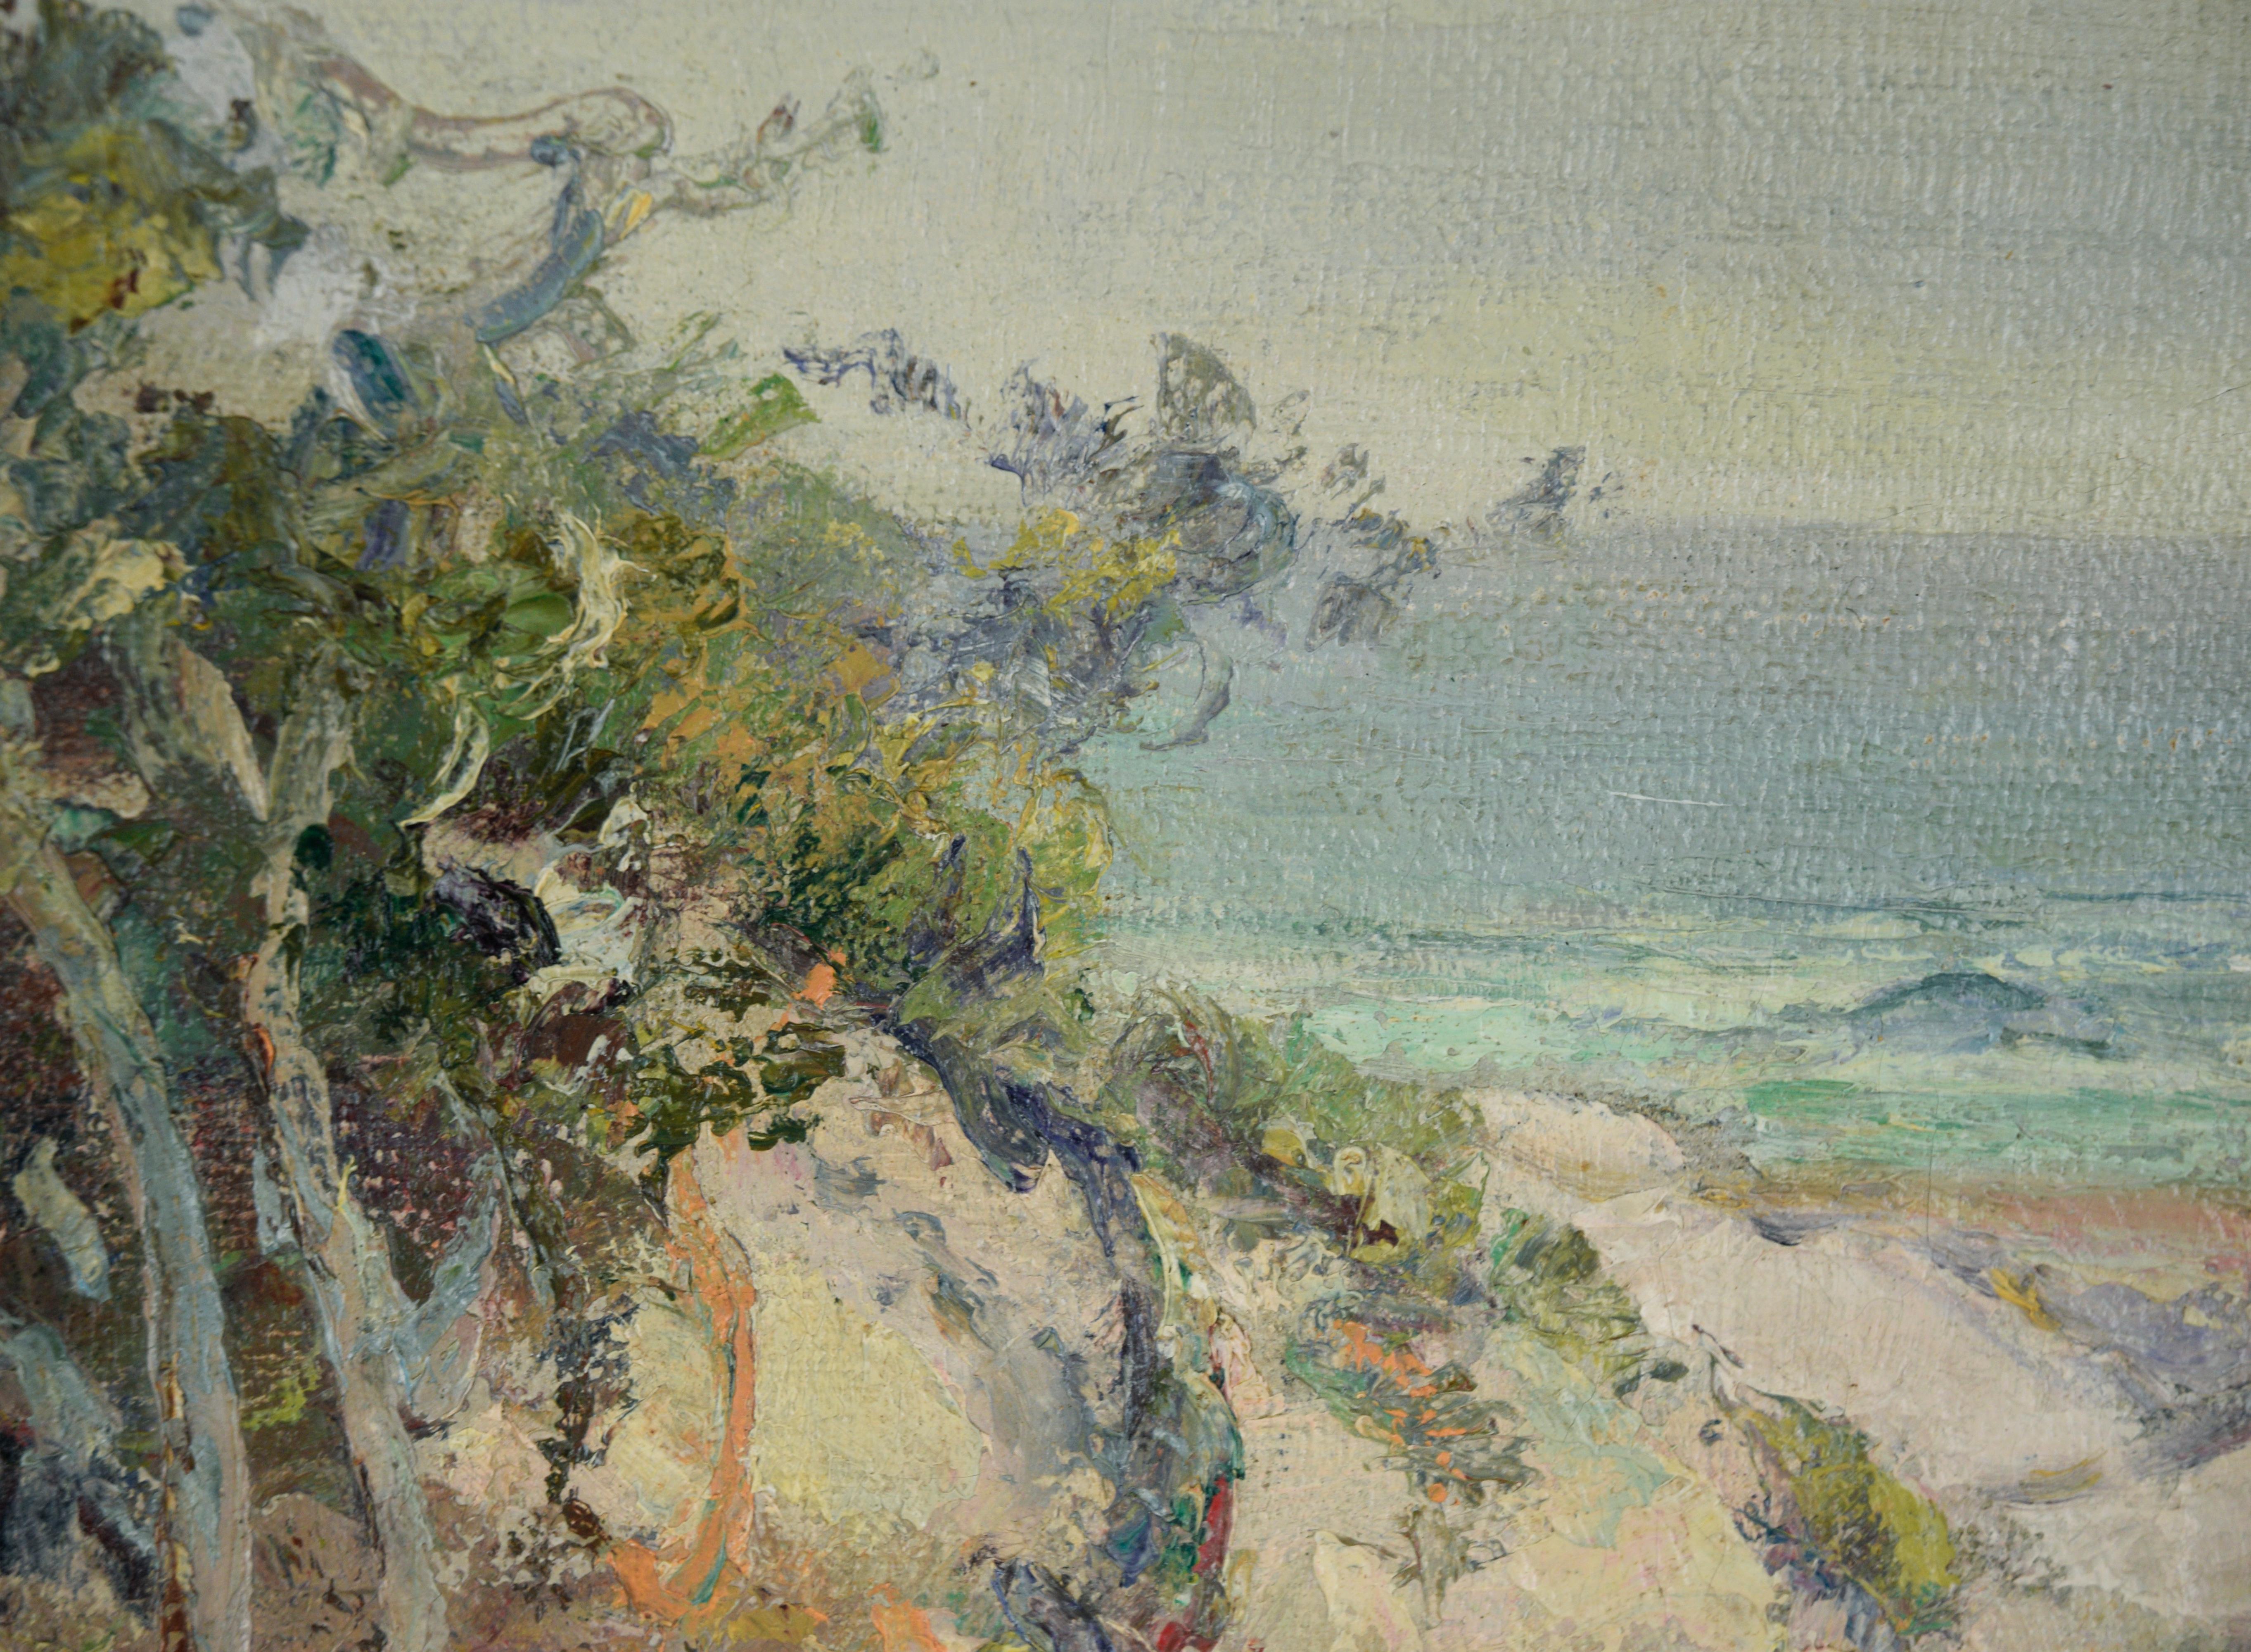 1927 Carmel by the Sea - Beach, California Coastline - Oil on Linen - American Impressionist Painting by Charles Harmon